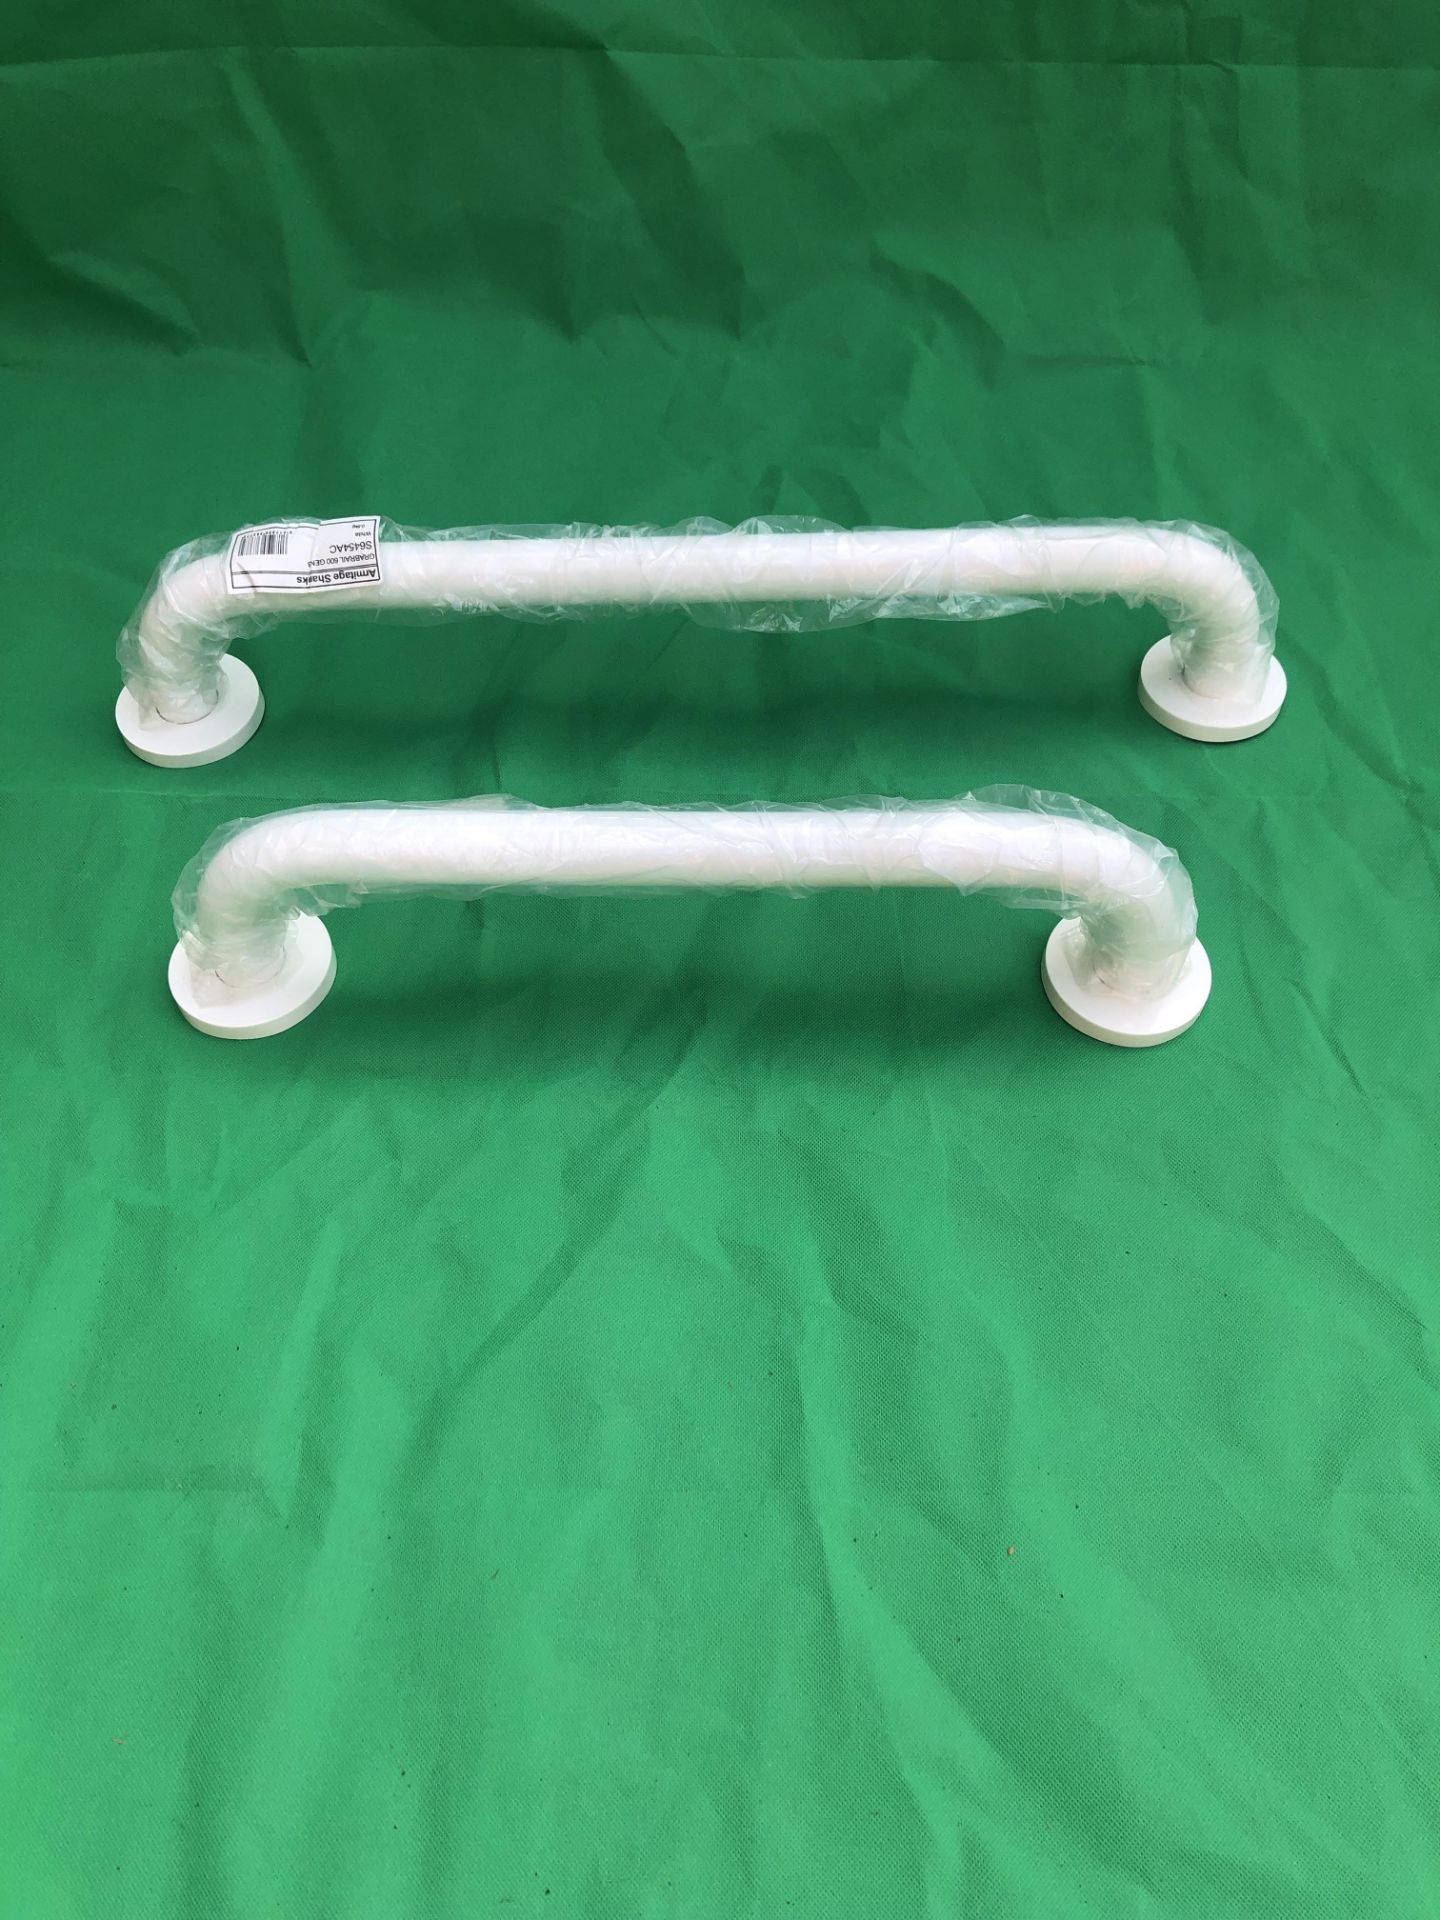 Hand Grab Rails in White x 2. 1 x 60cm and 1 45cm